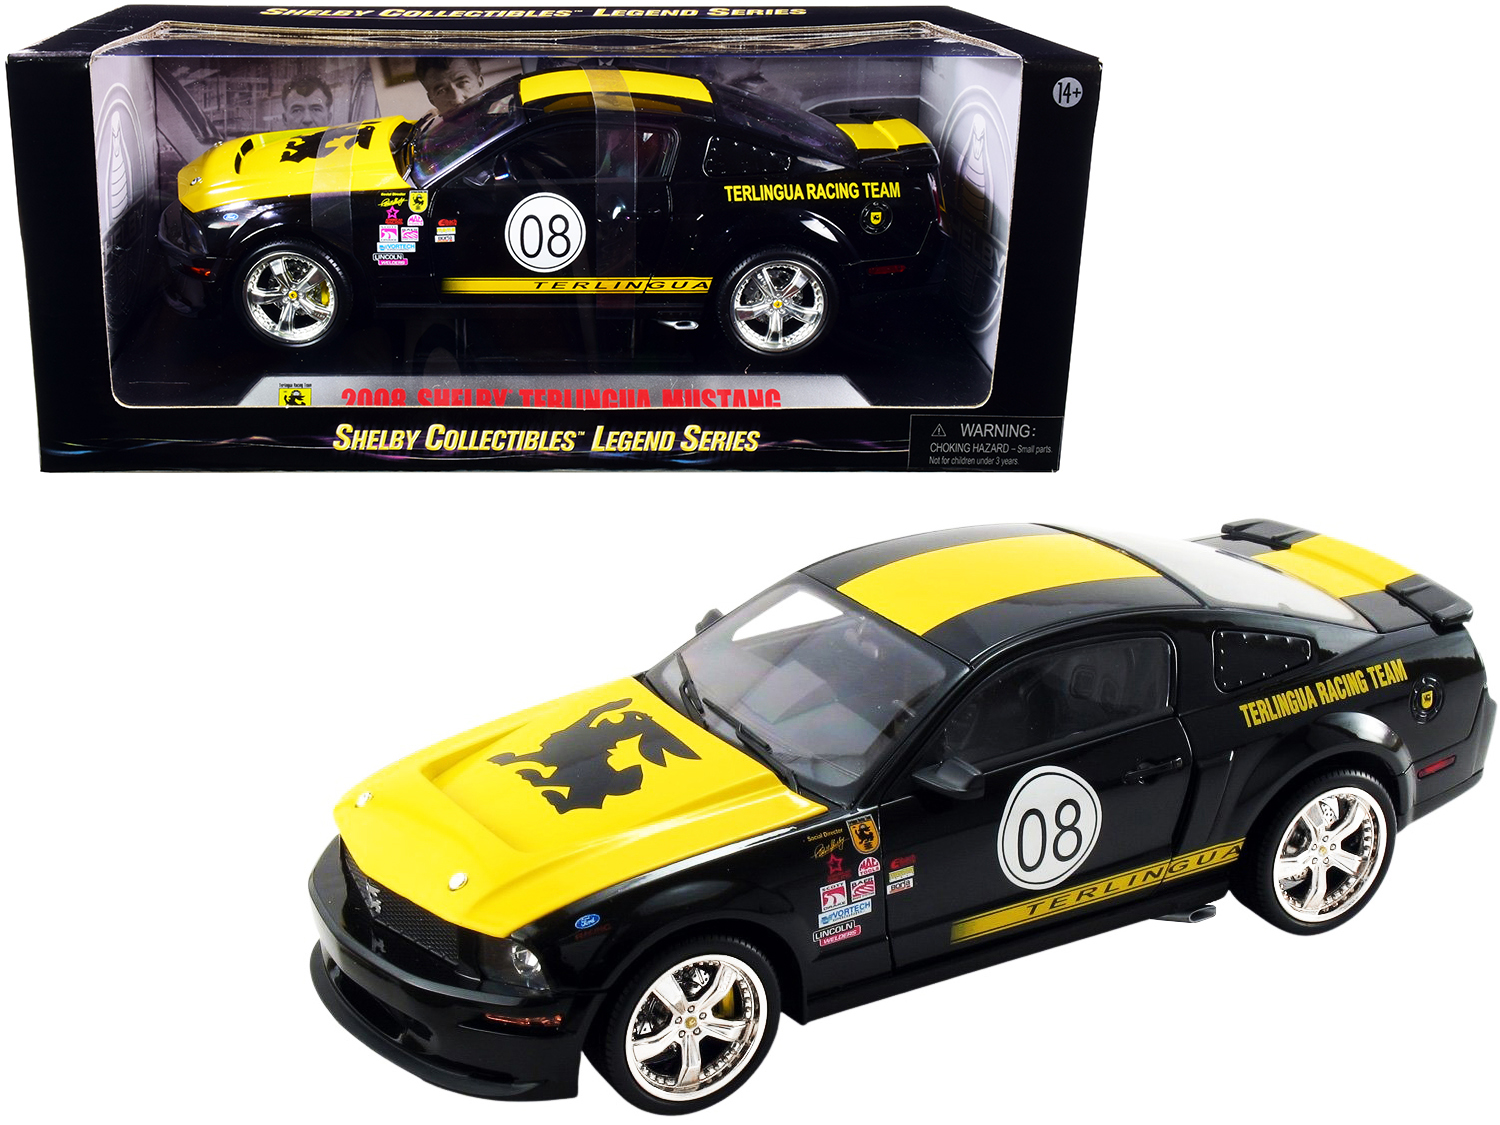 SHELBY COLLECTIBLES 2008 Ford Shelby Mustang #08 "Terlingua" Black & Yellow "Shelby Collectibles Legend" 1/18 Diecast Model by Shelby Collectibles